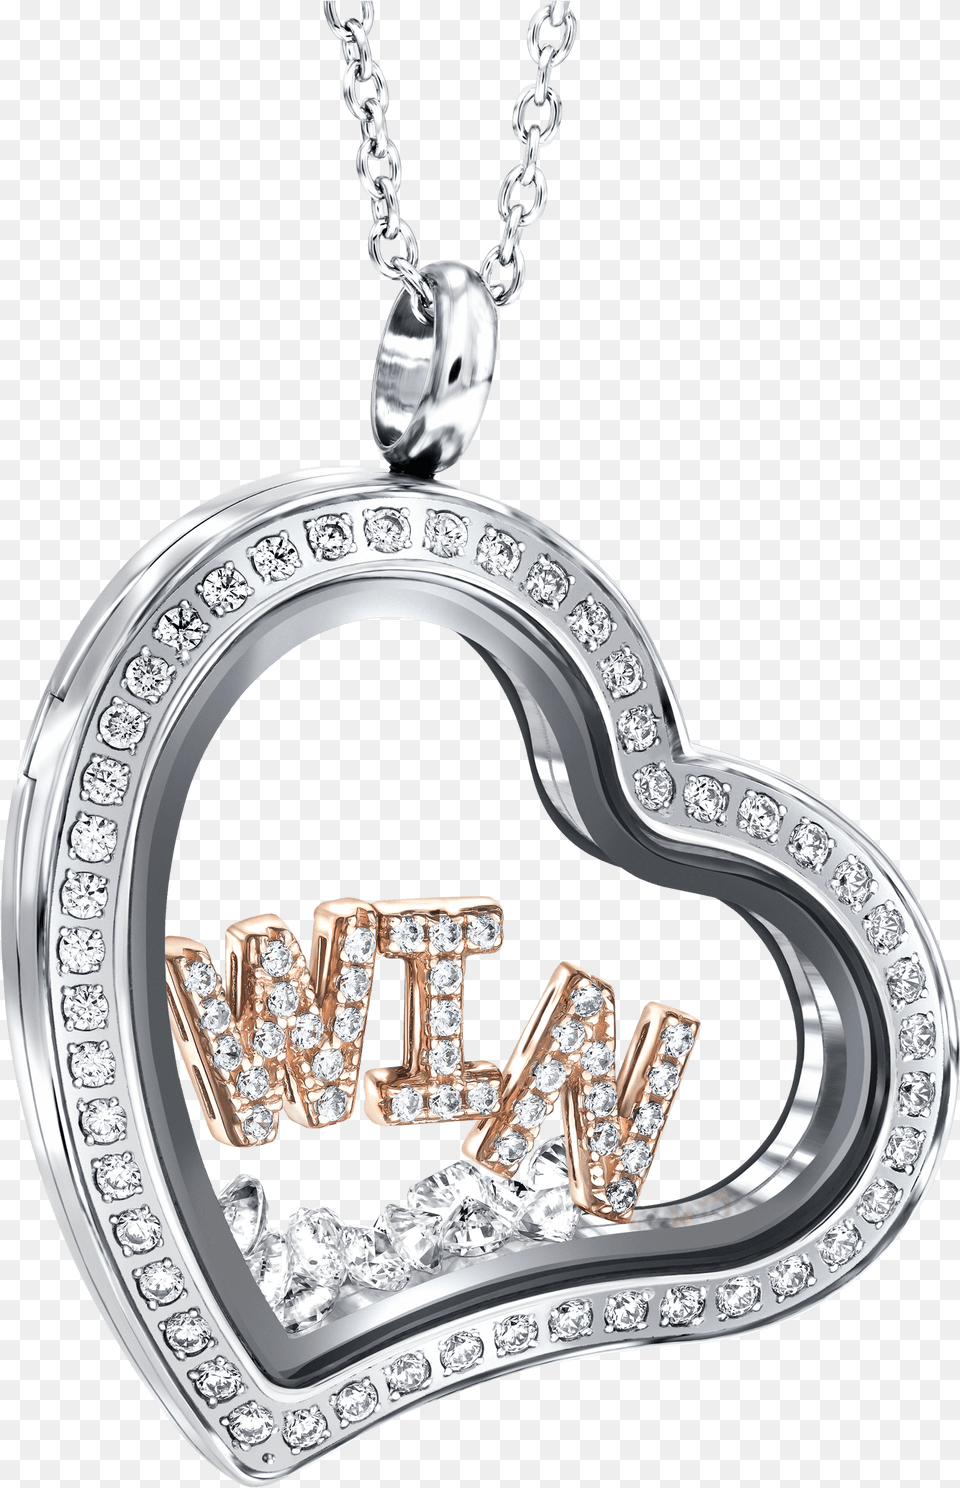 Download Heart Pendant File Locket Image With No Portable Network Graphics, Accessories, Jewelry, Necklace, Diamond Png